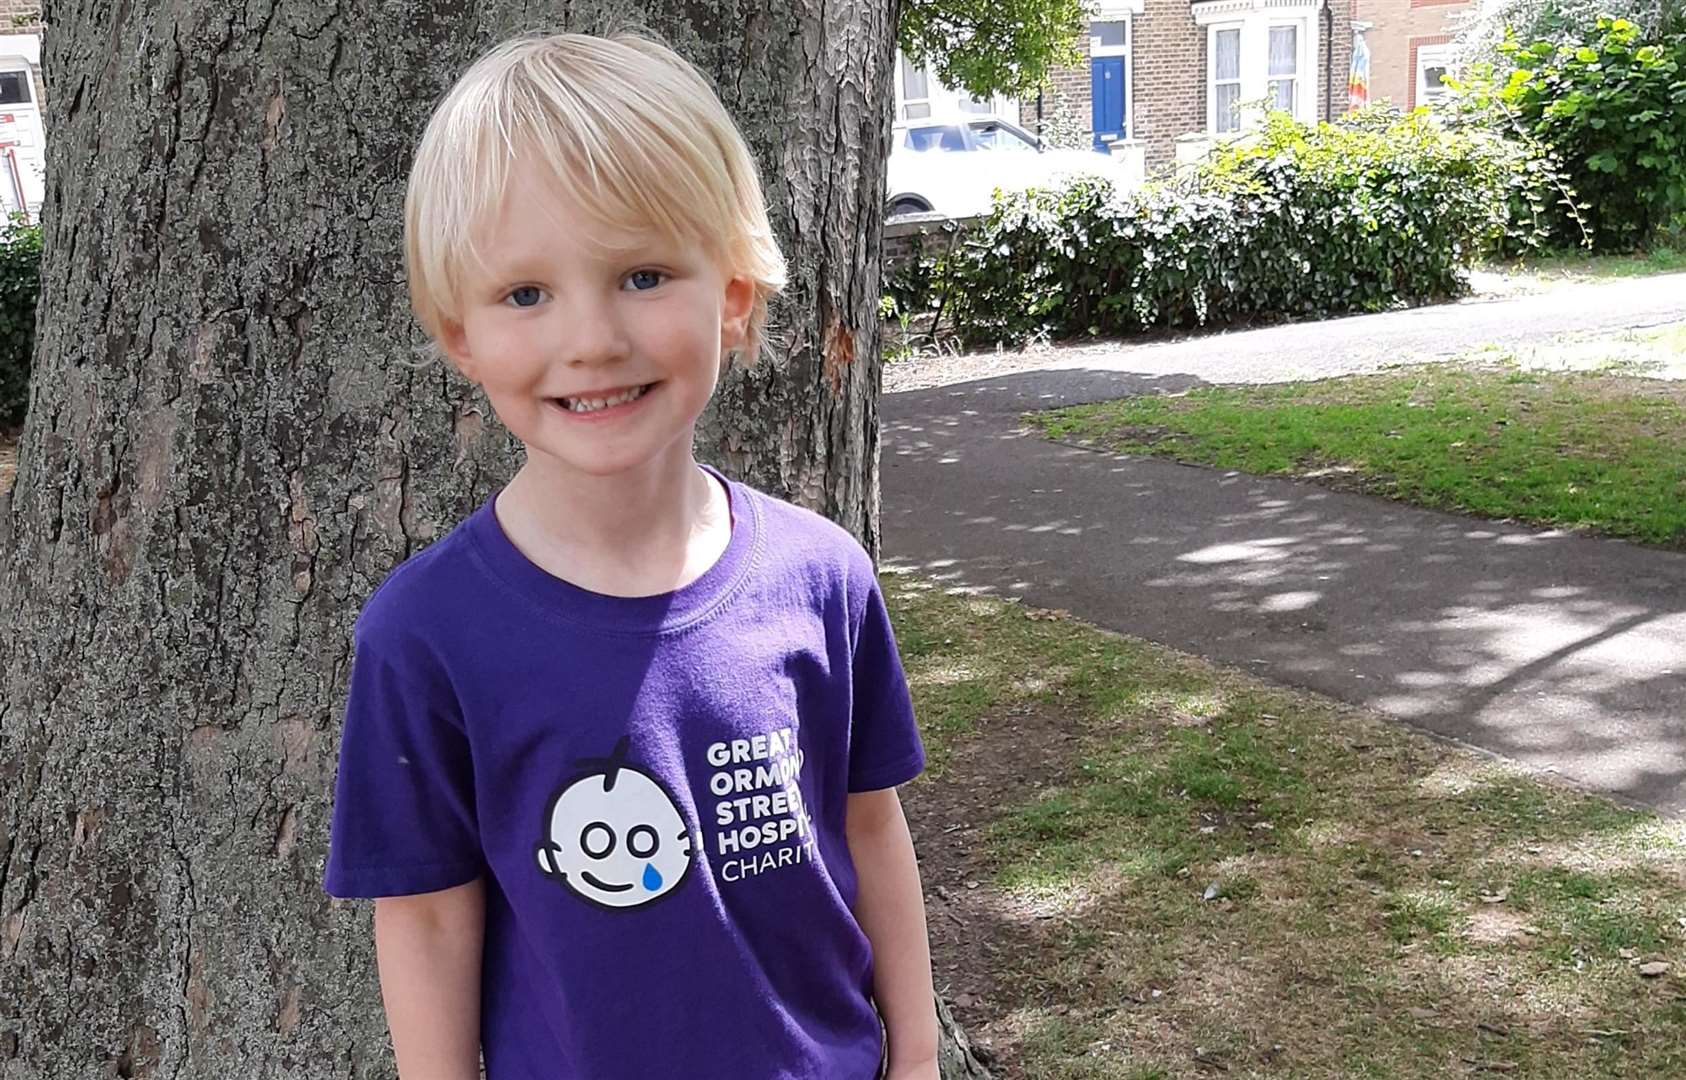 Four-year-old Rory Newing from Sheppey was born with a deformed heart and saved by surgeons at Great Ormond Street Hospital. He is now repaying that debt by running 31k around Sheerness for the London children's hospital